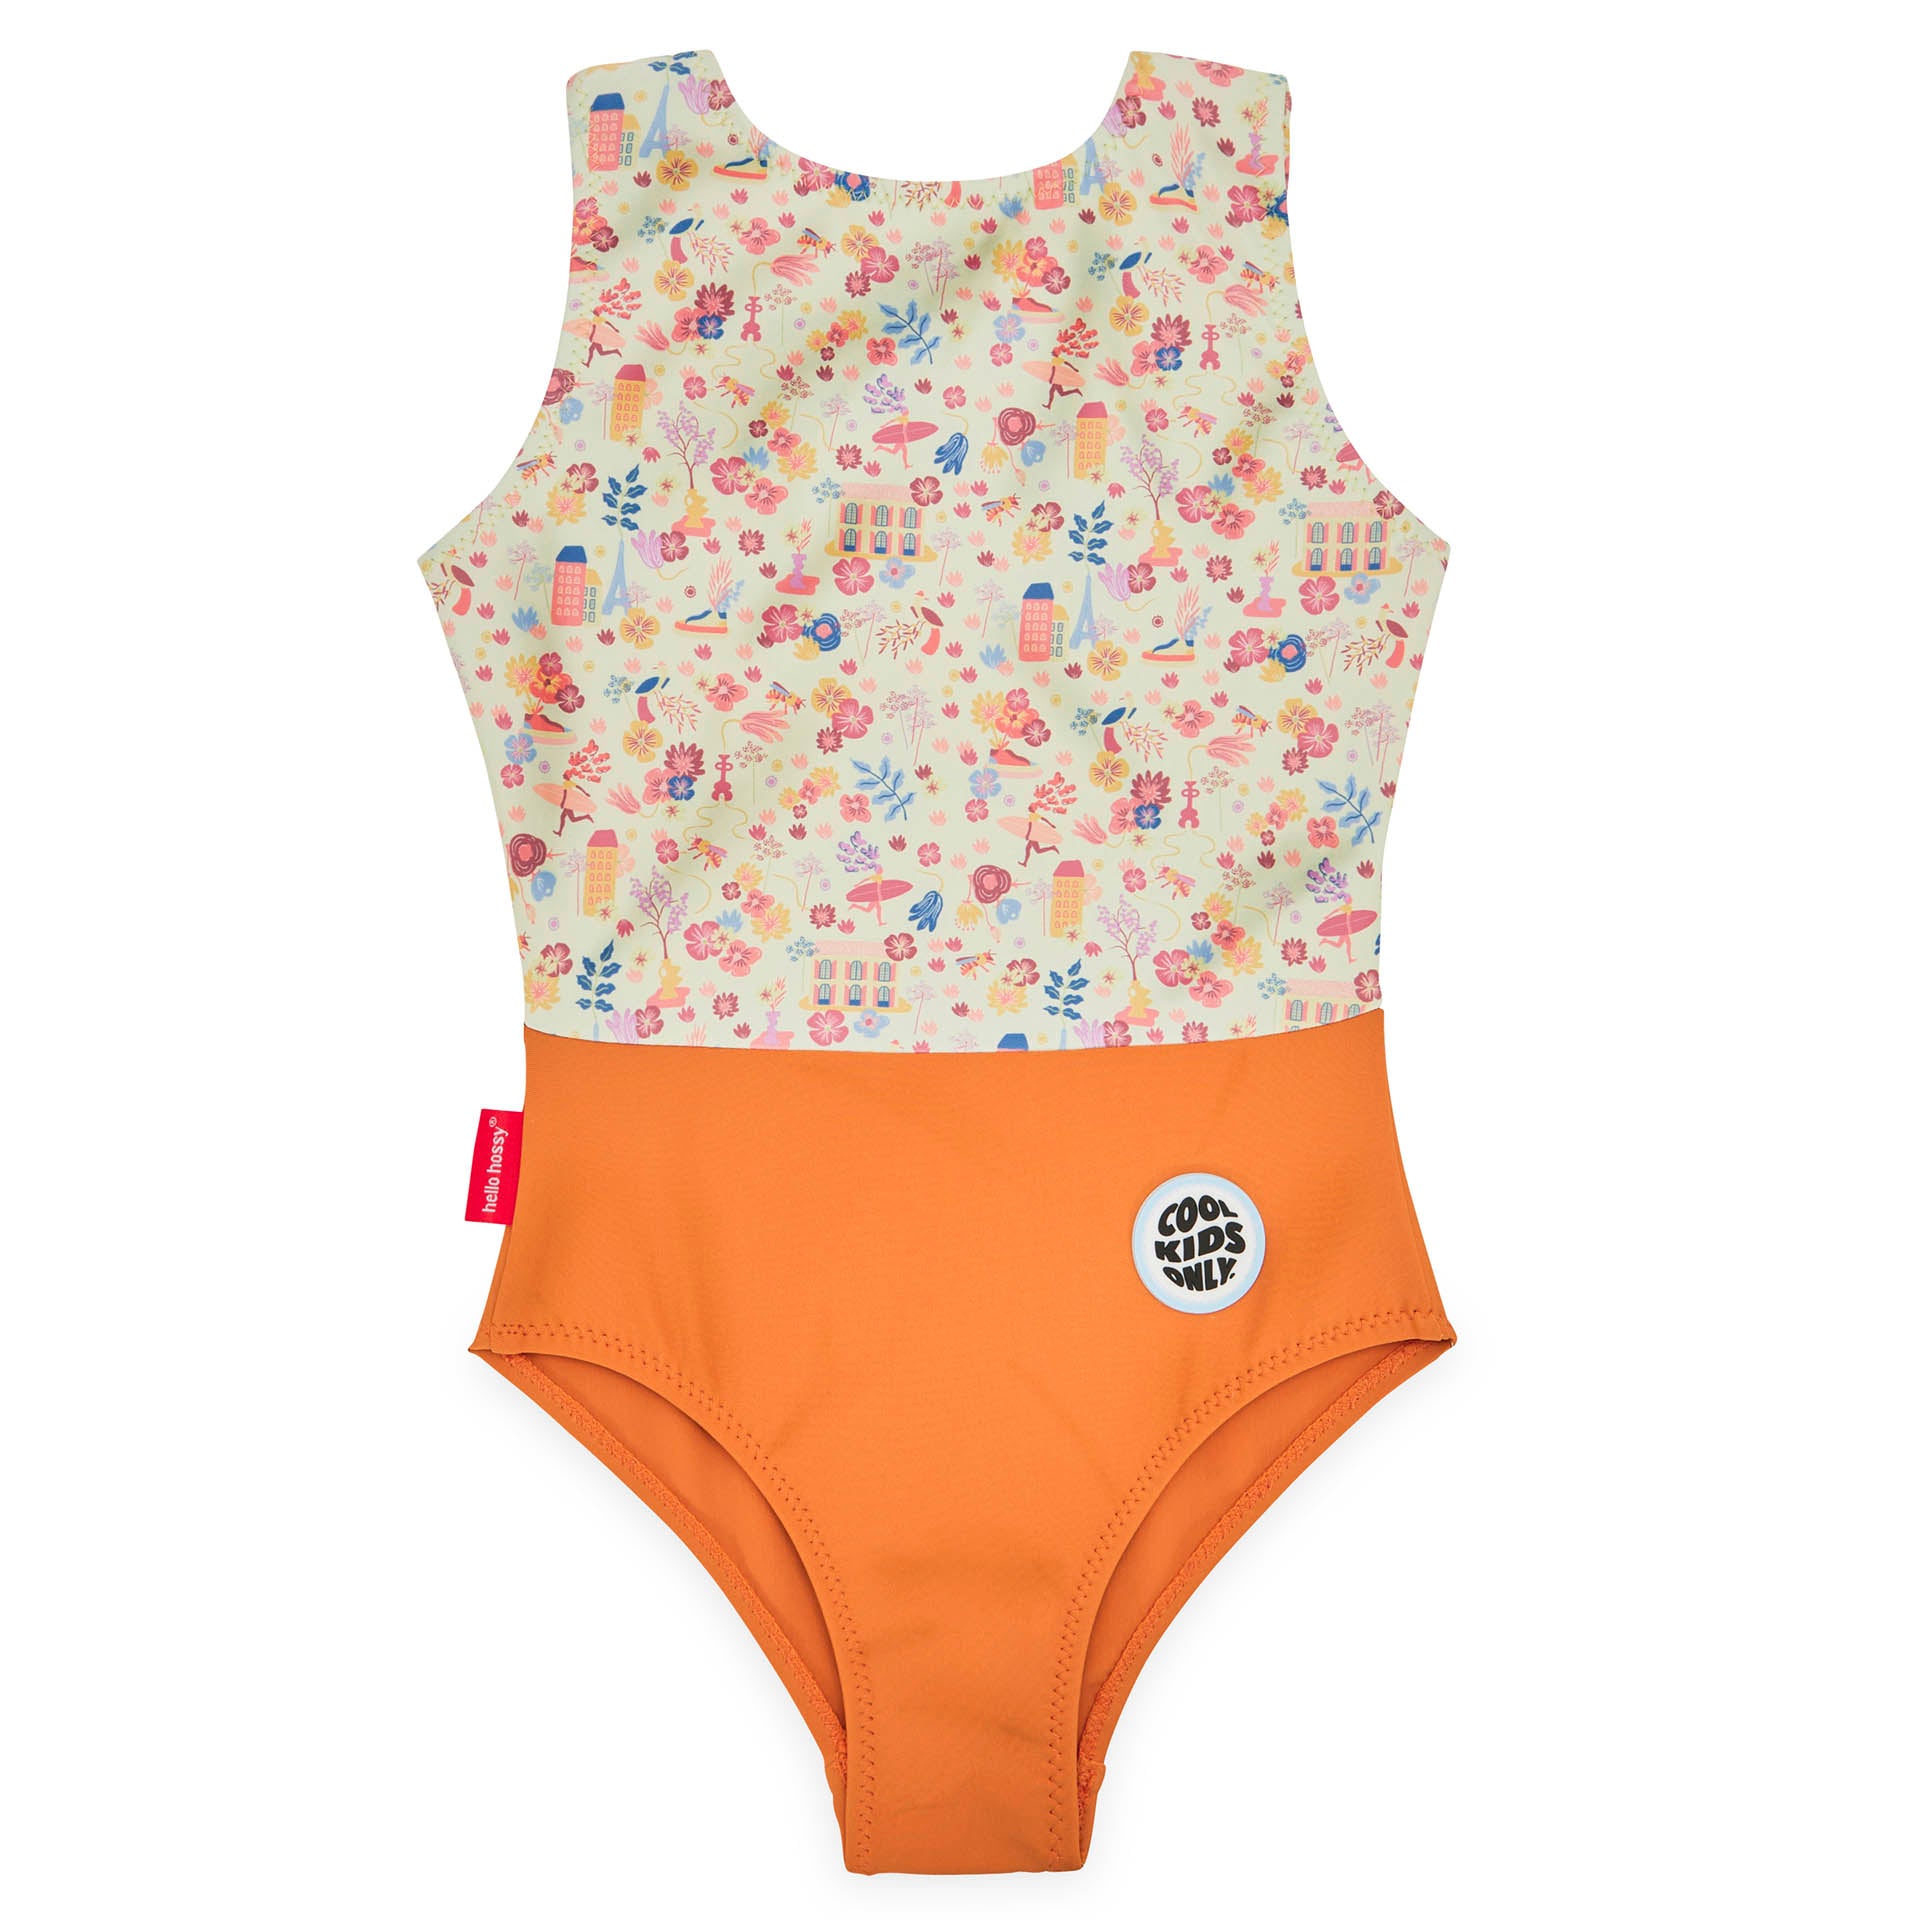 Maillot de Bain Fille Dried Flowers anti-uv, une pièce, Cool Kids Only !